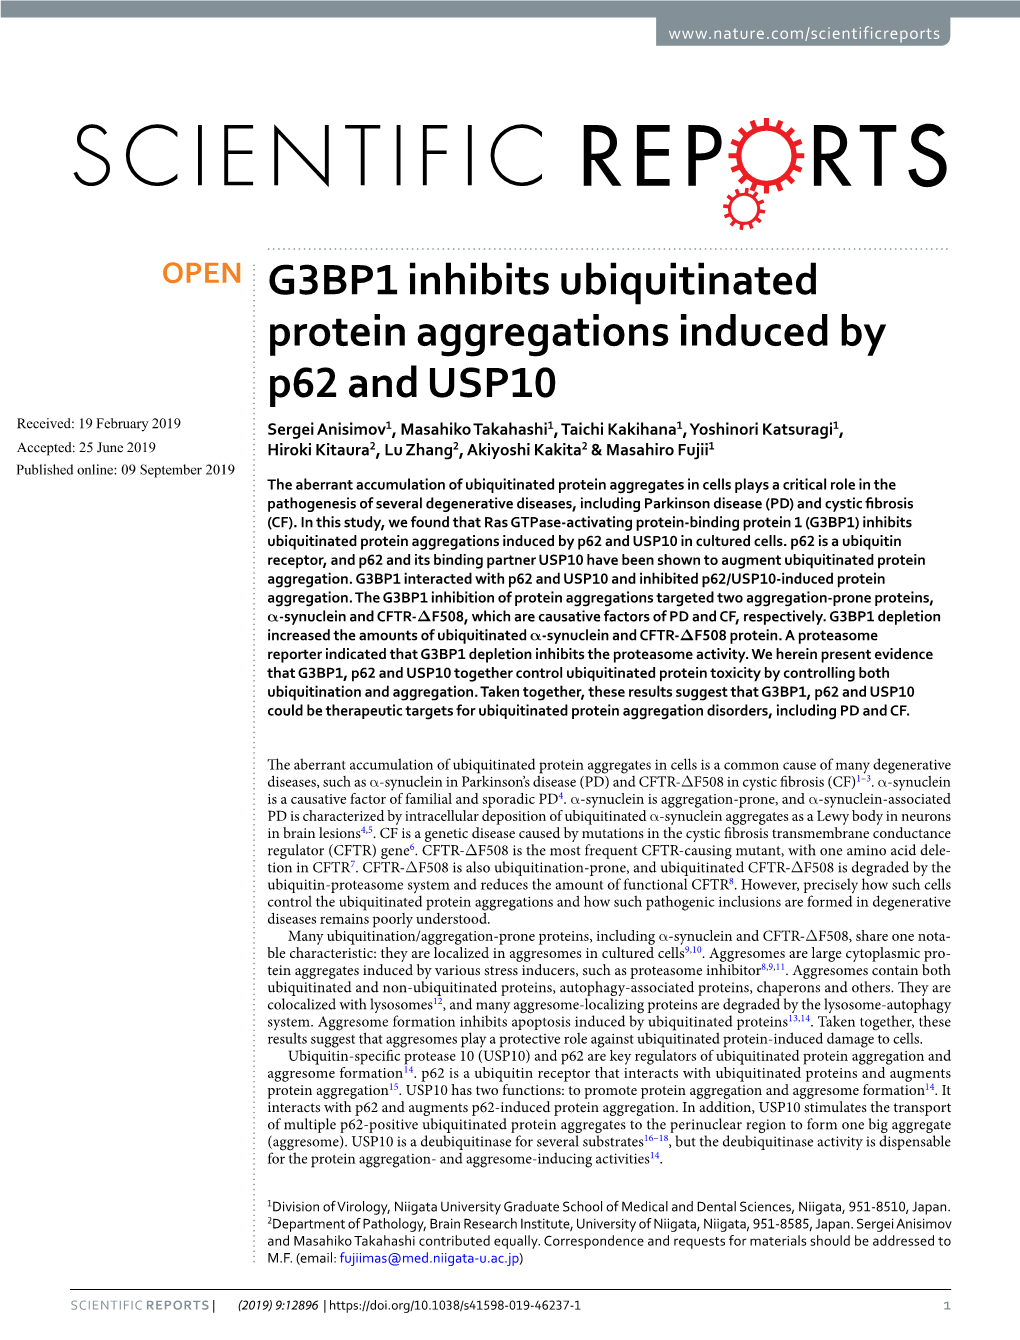 G3BP1 Inhibits Ubiquitinated Protein Aggregations Induced by P62 And